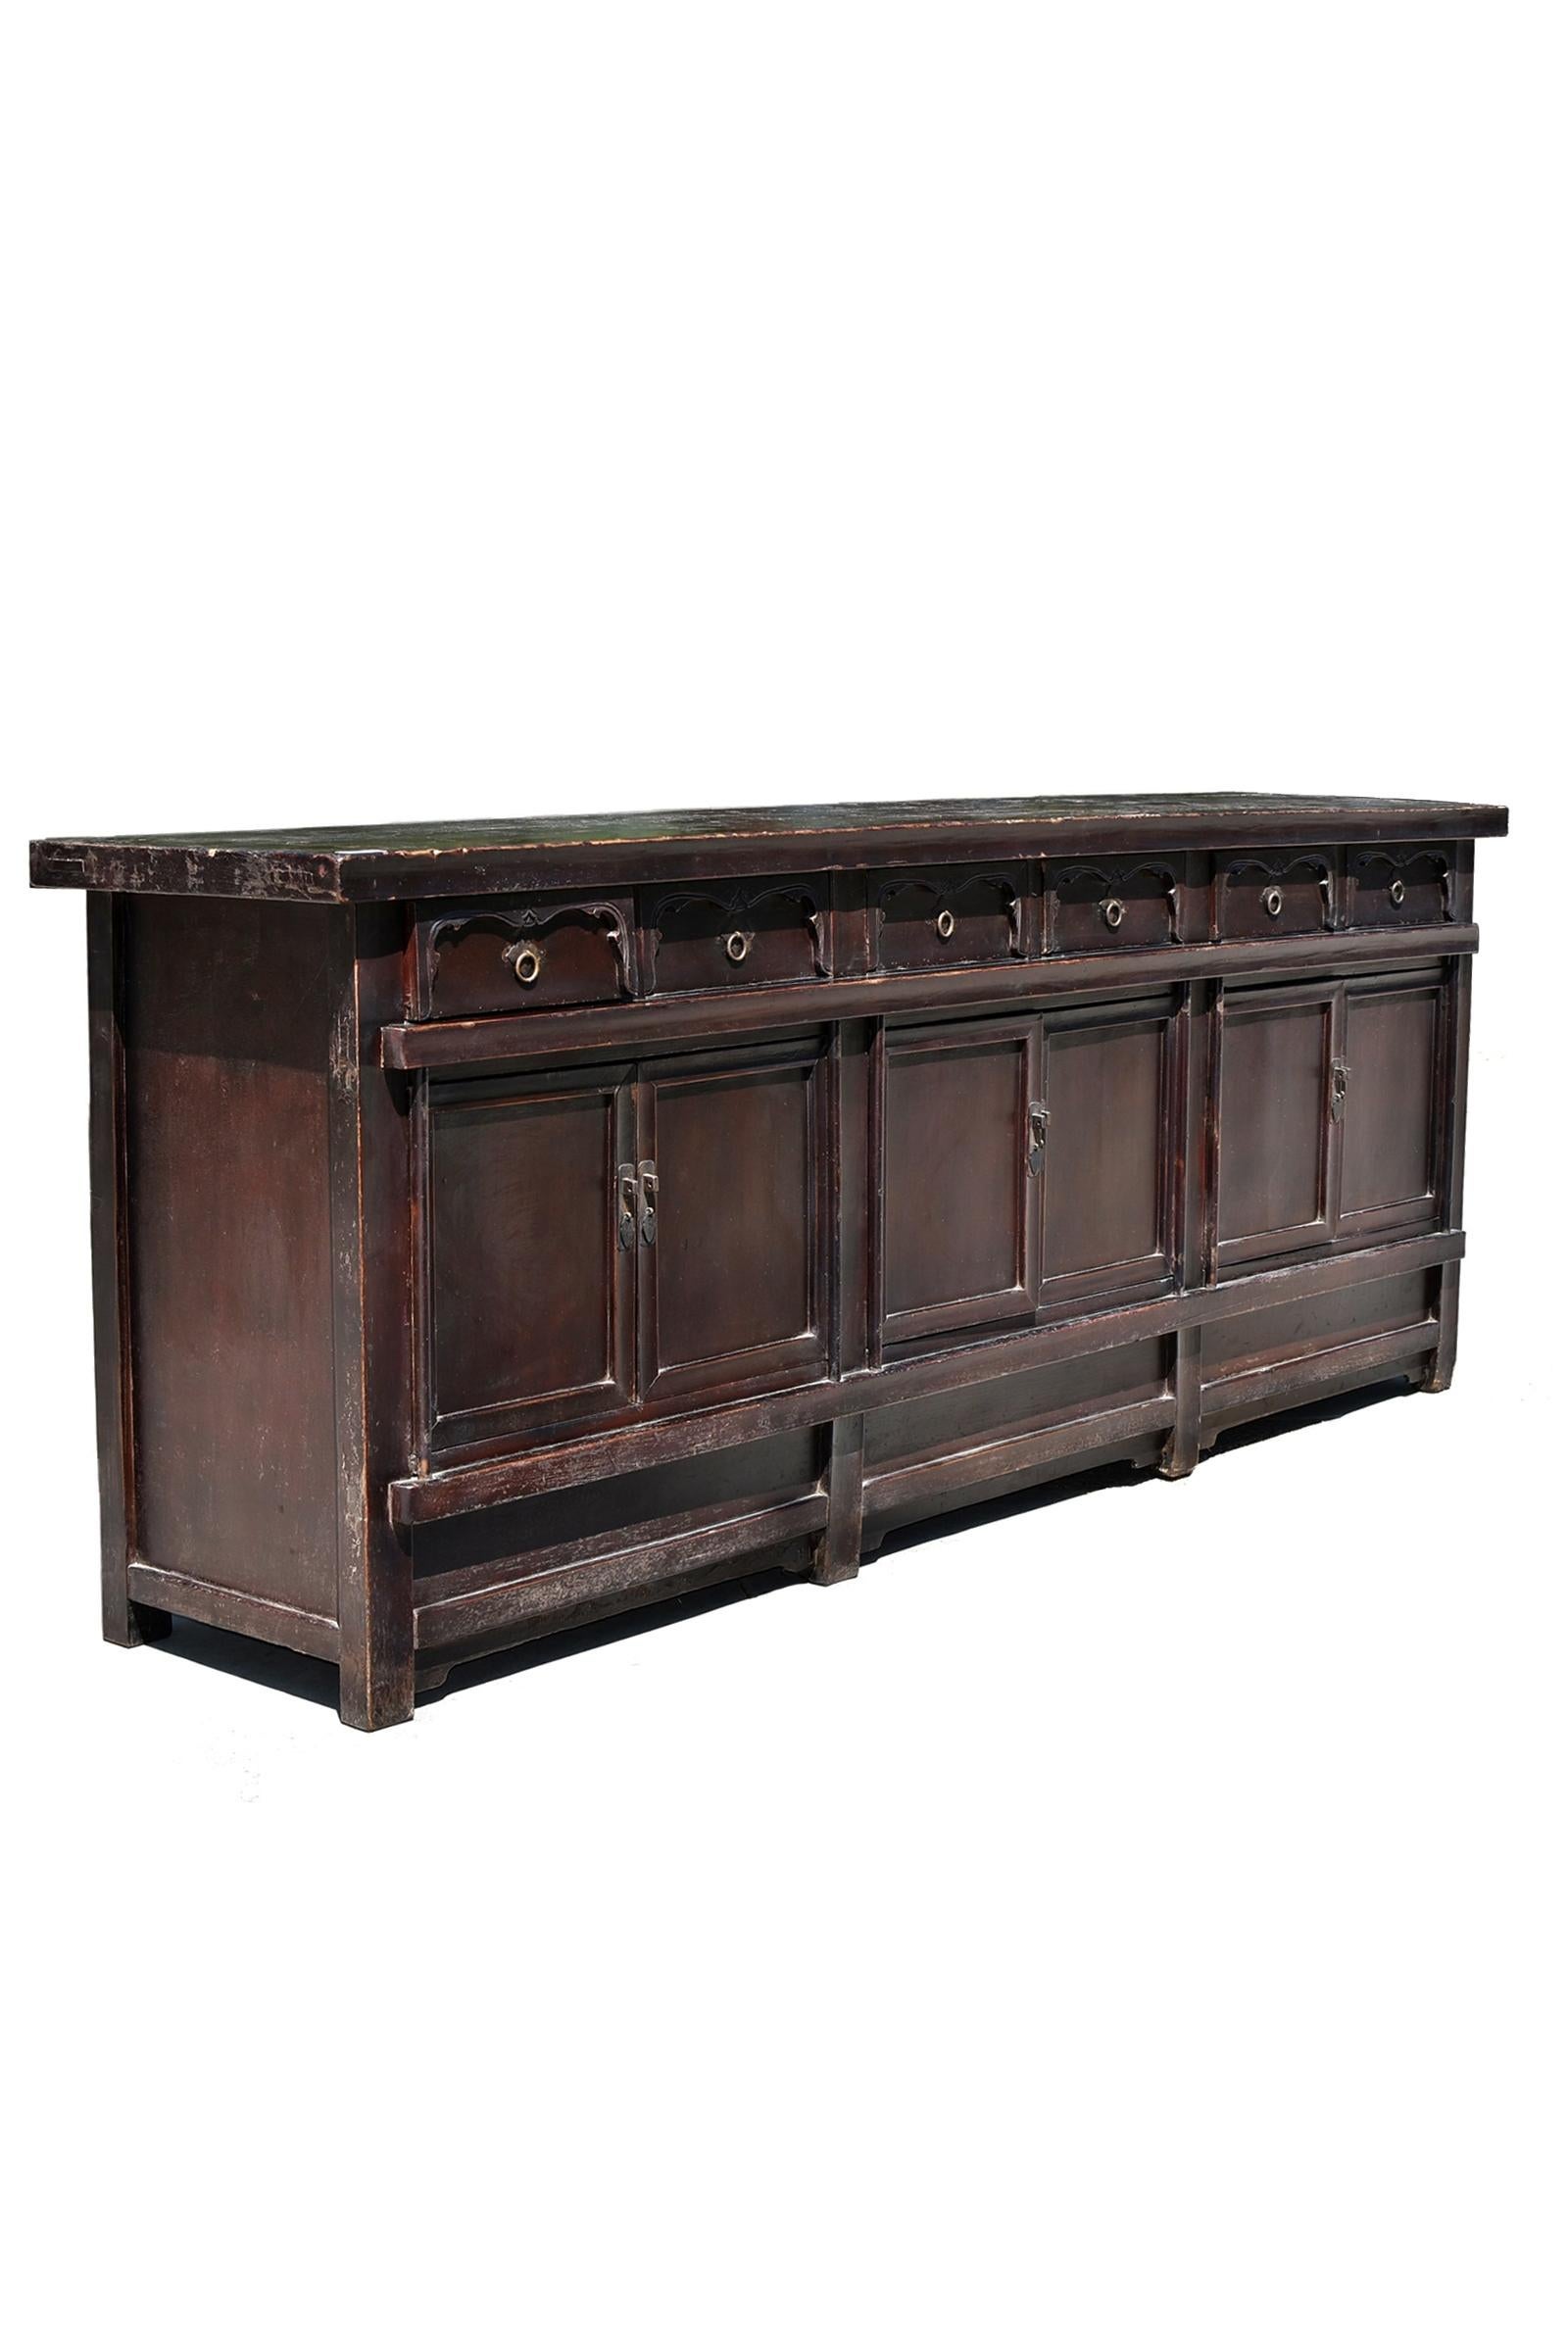 A monumental 9 feet 8 inches solid wood sideboard from early 19th century. The top is made of solid boards in 2.5